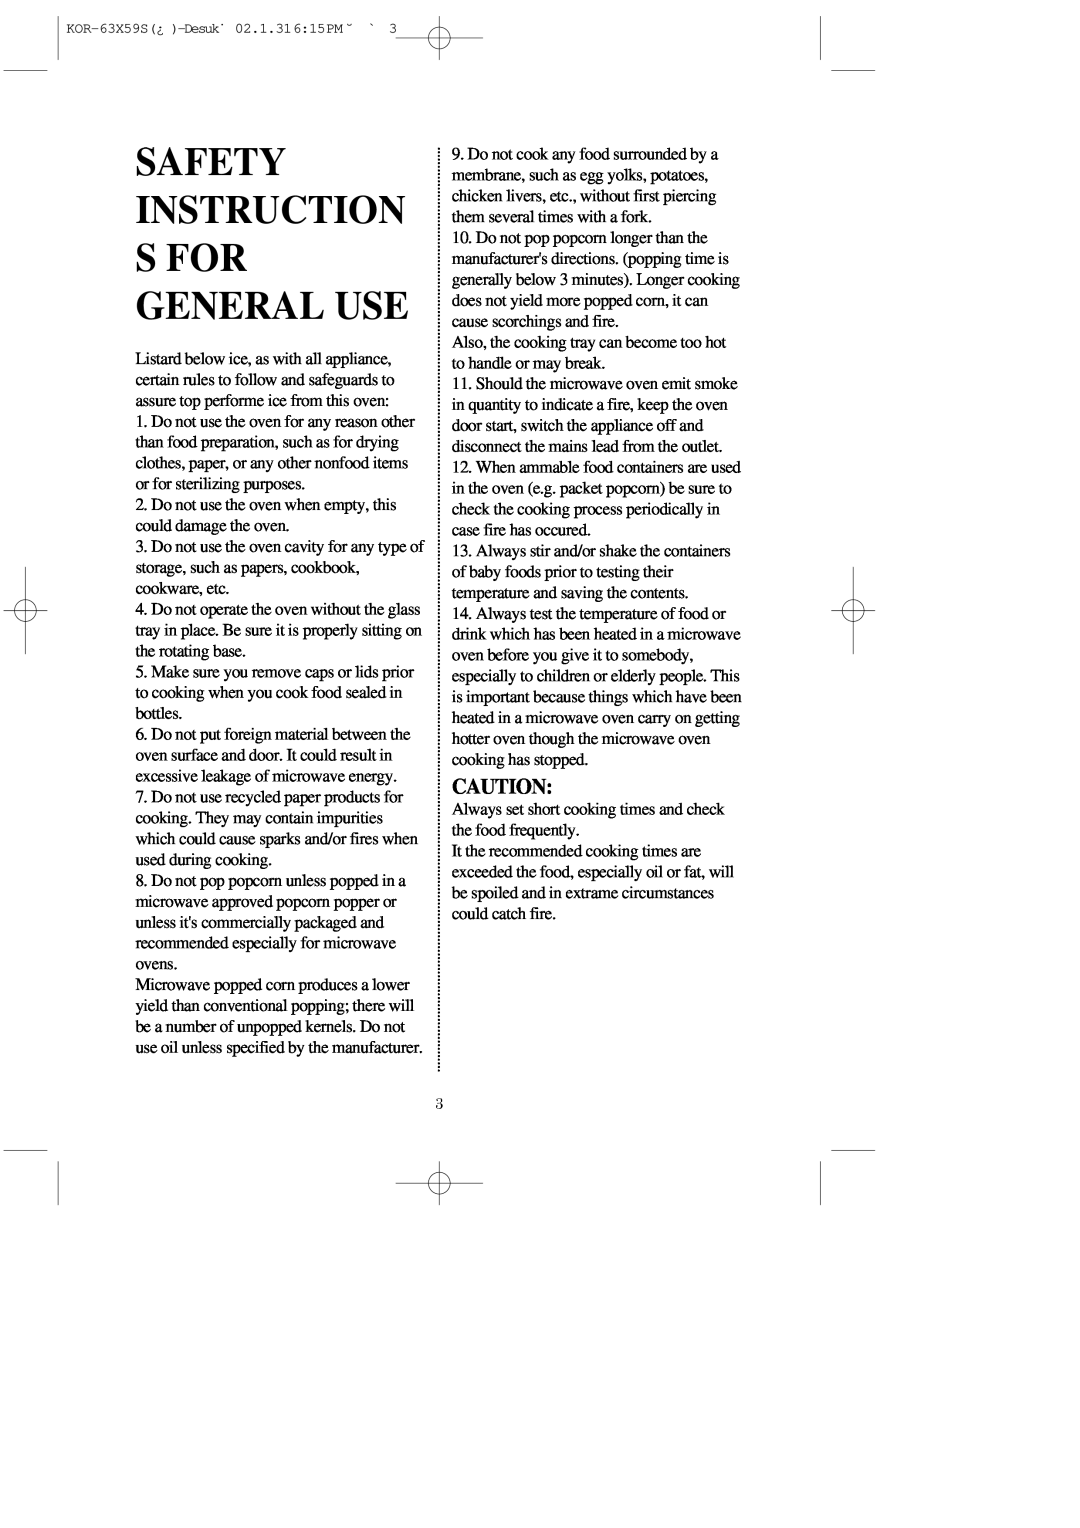 Daewoo KOR-63X5 operating instructions Safety Instruction Sfor General Use 